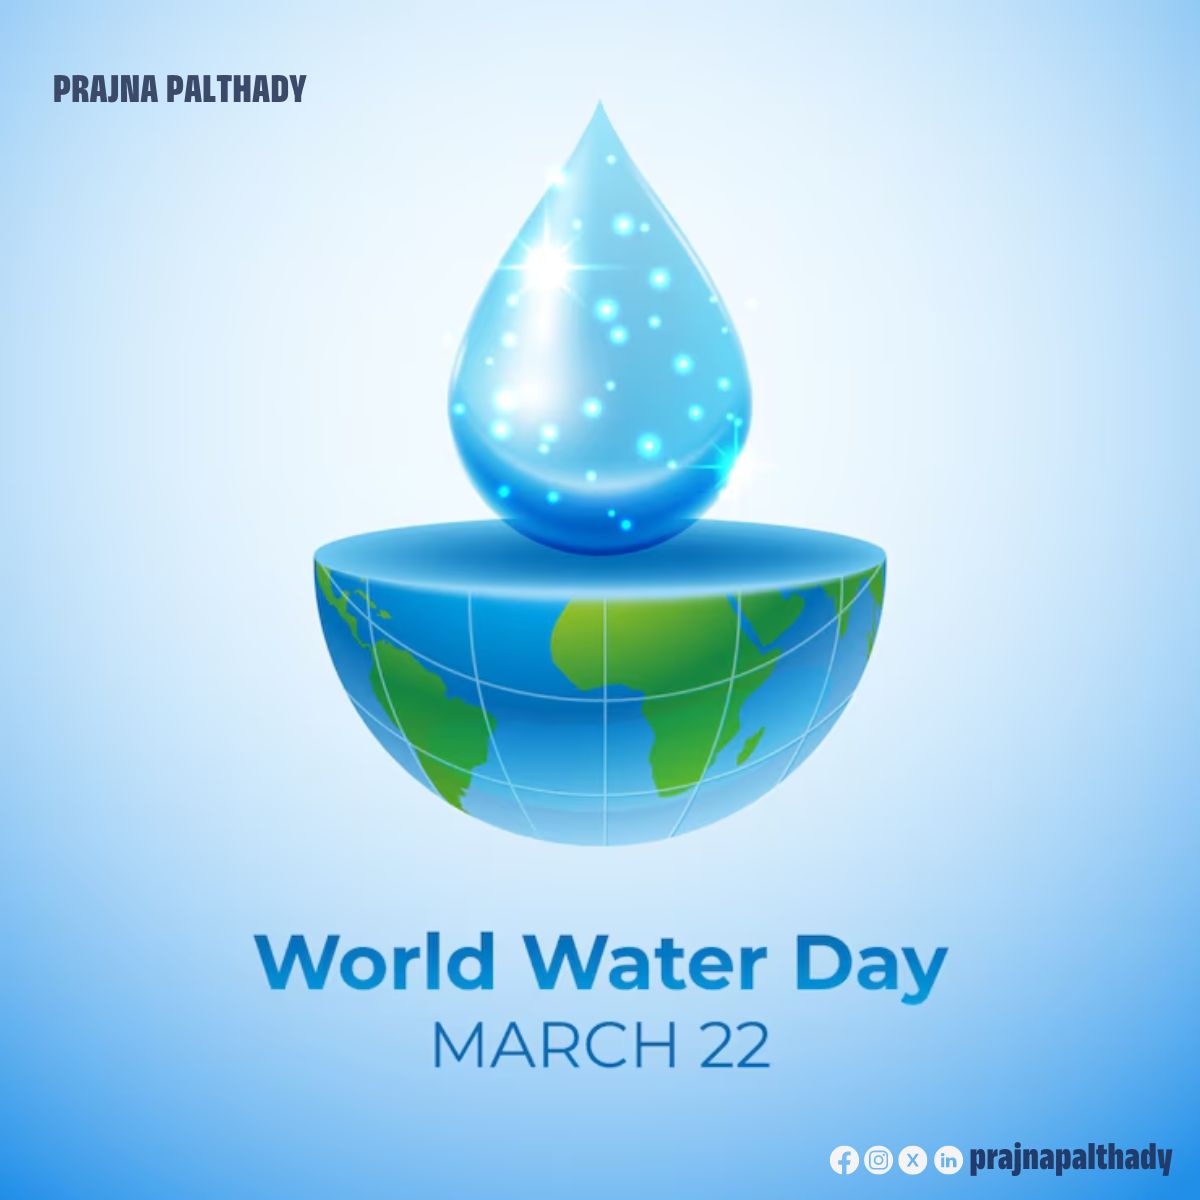 This #WorldWaterDay, support local organizations working to solve Bengaluru's water woes. Every bit helps!  #WaterHeroes #MakeADifference

 #SupportLocal #BengaluruWaterCrisis #iprajnapalthady